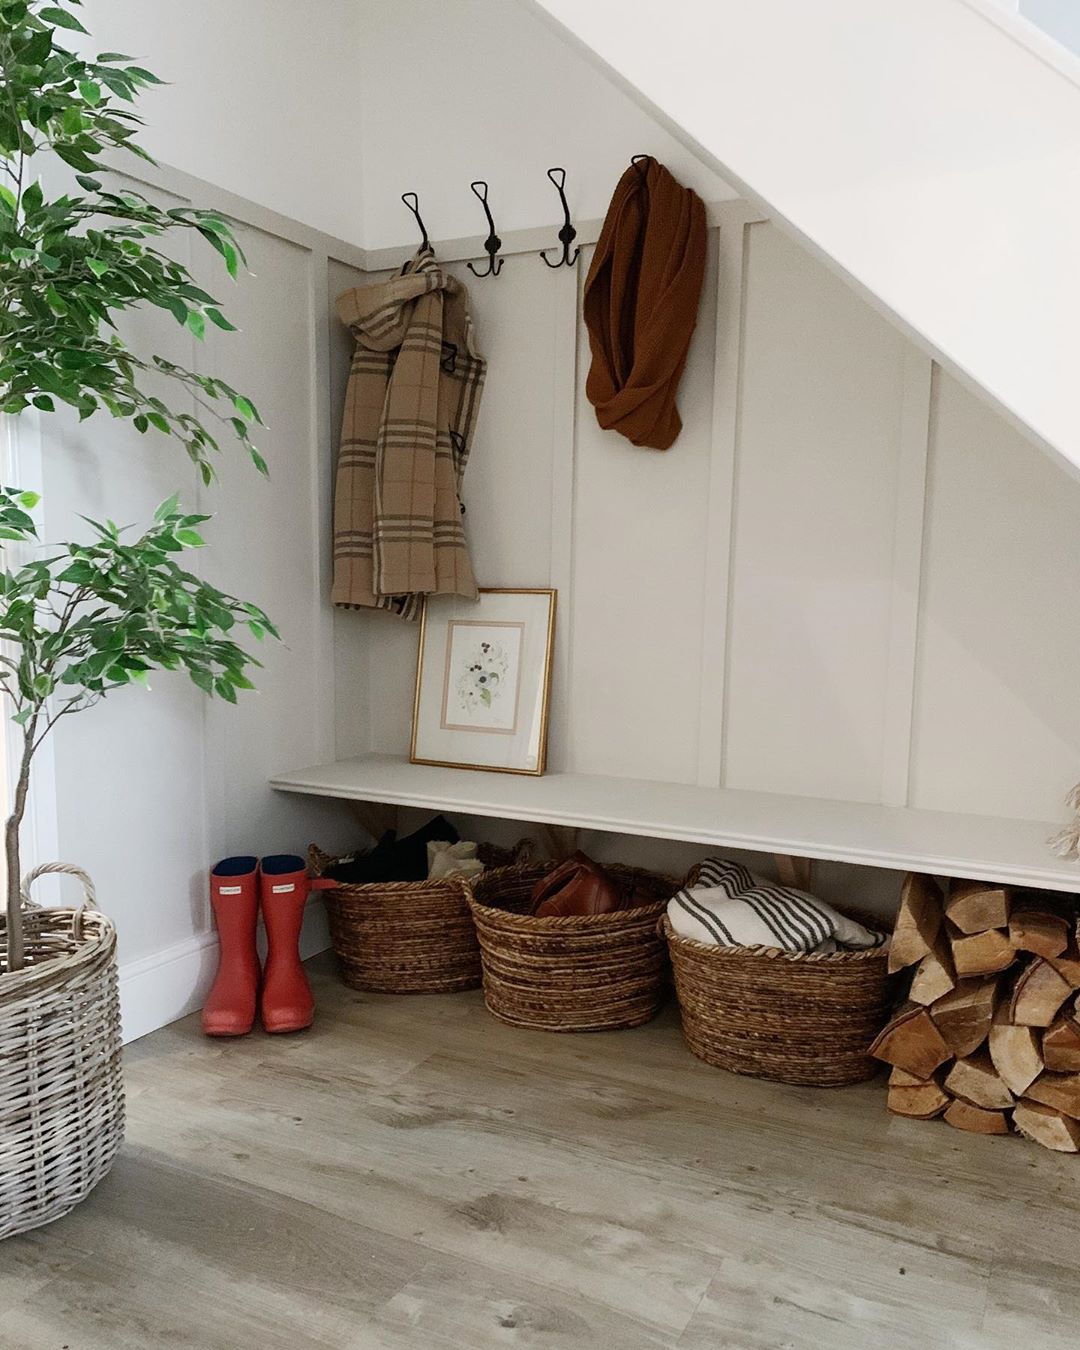 Small mud room with coat hangers and a bench with wicker baskets underneath.